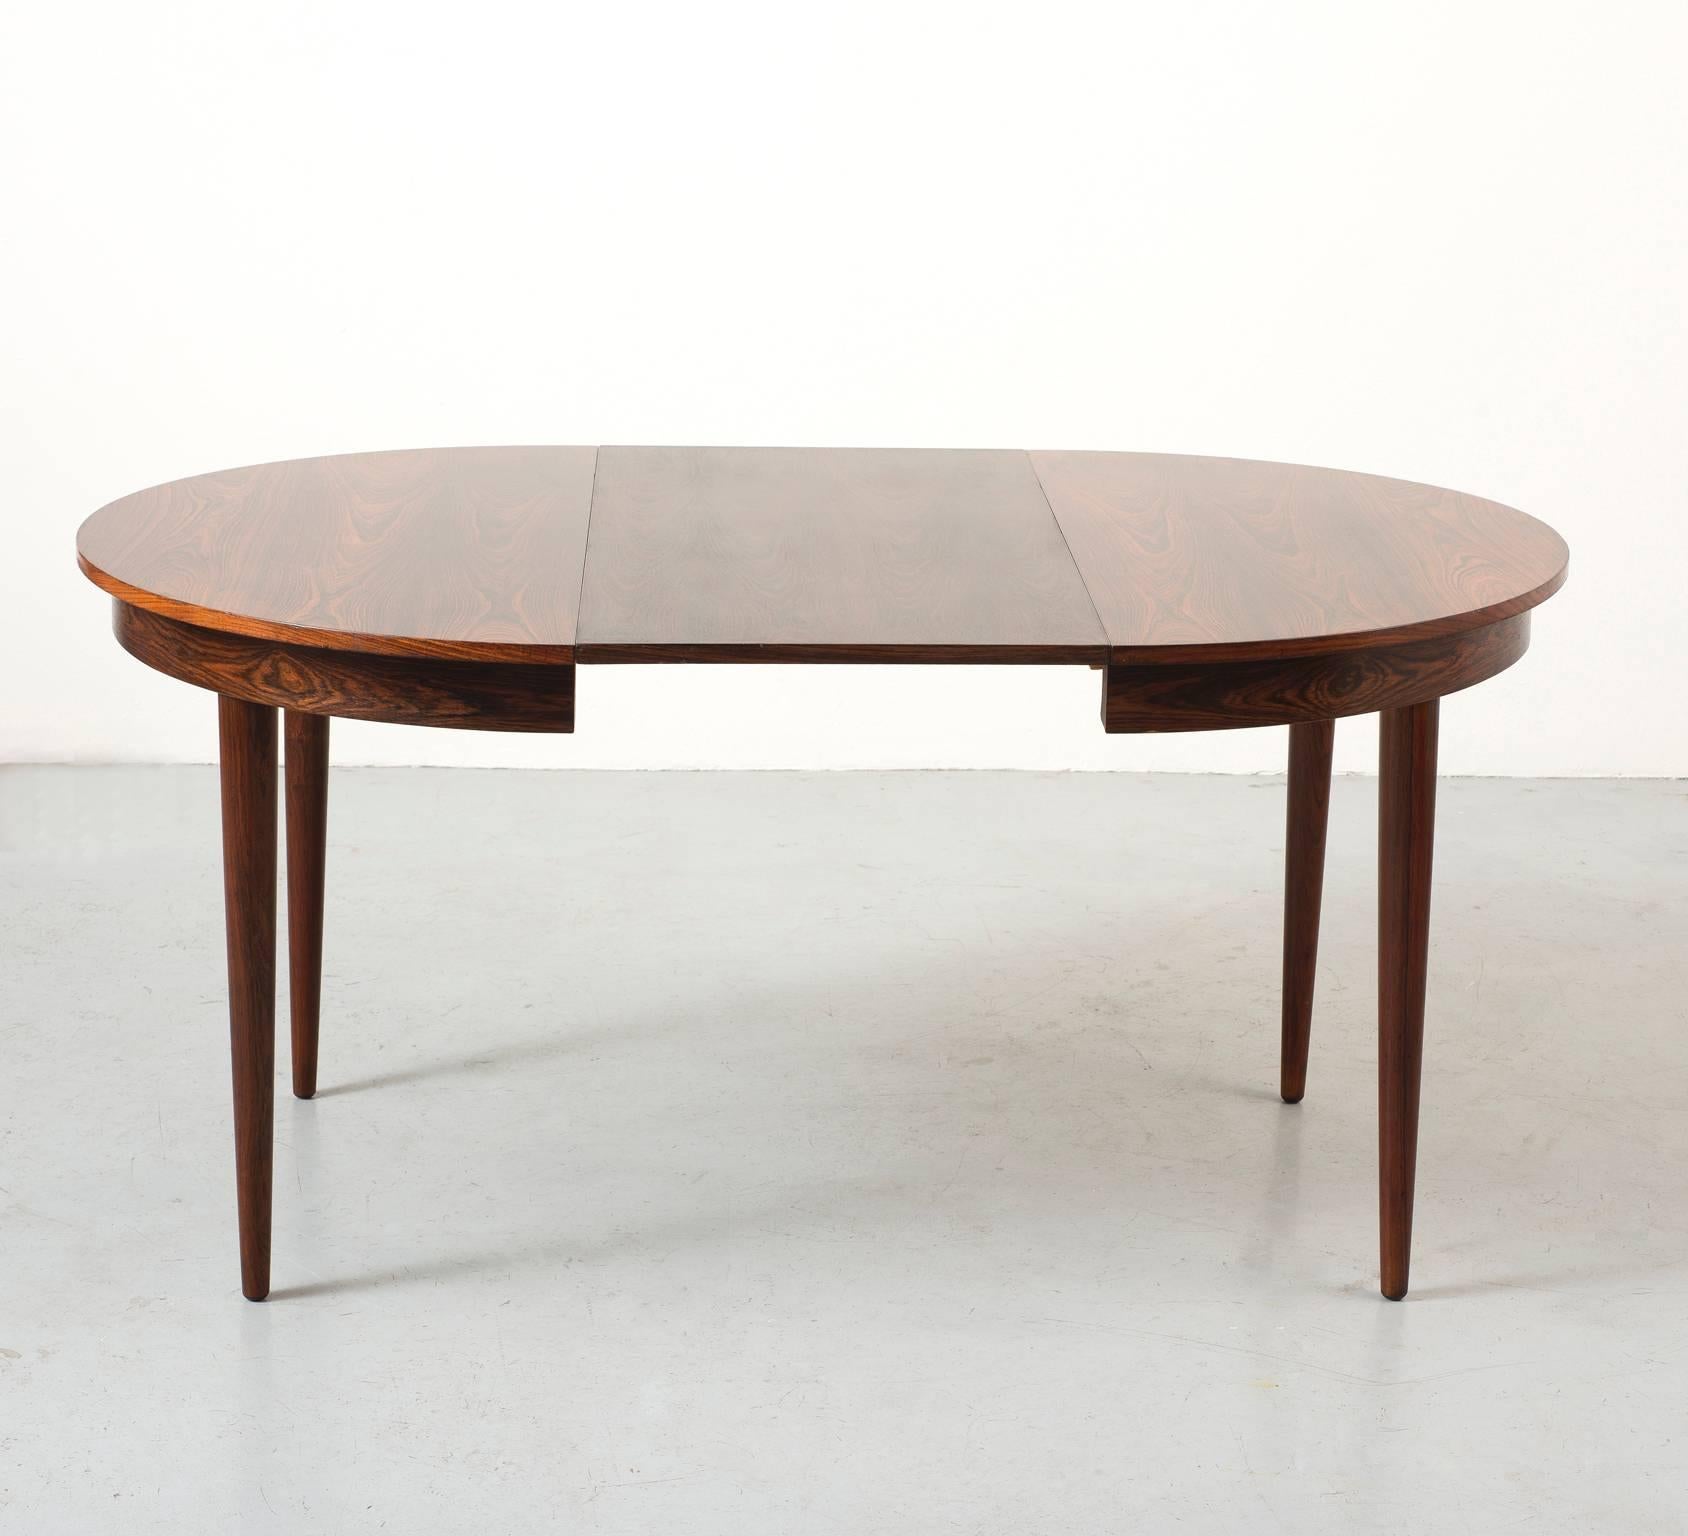 Round Hans Olsen Rosewood Dining Table with Extension Leaf 1